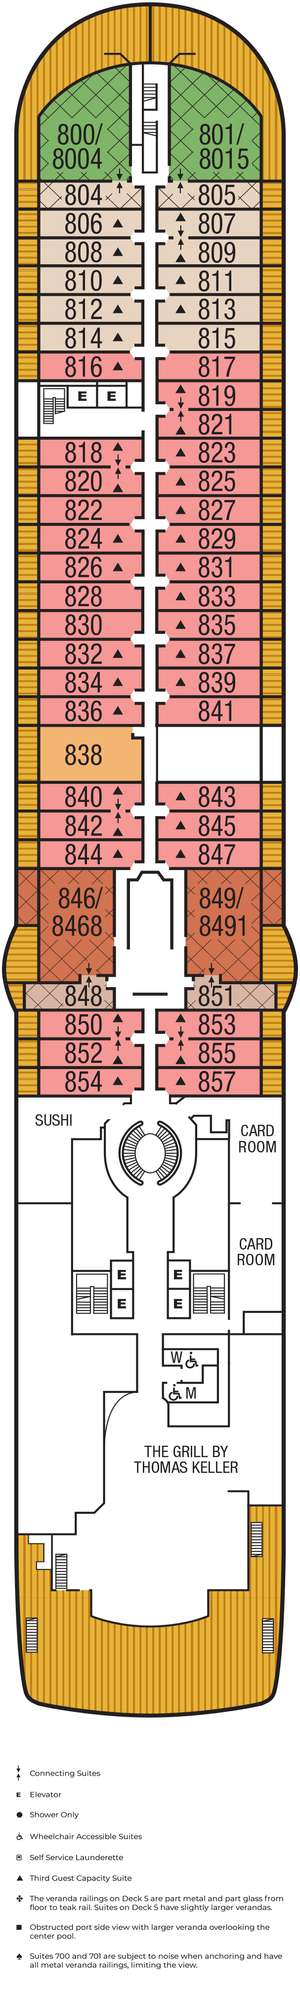 Deck plan for Seabourn Ovation